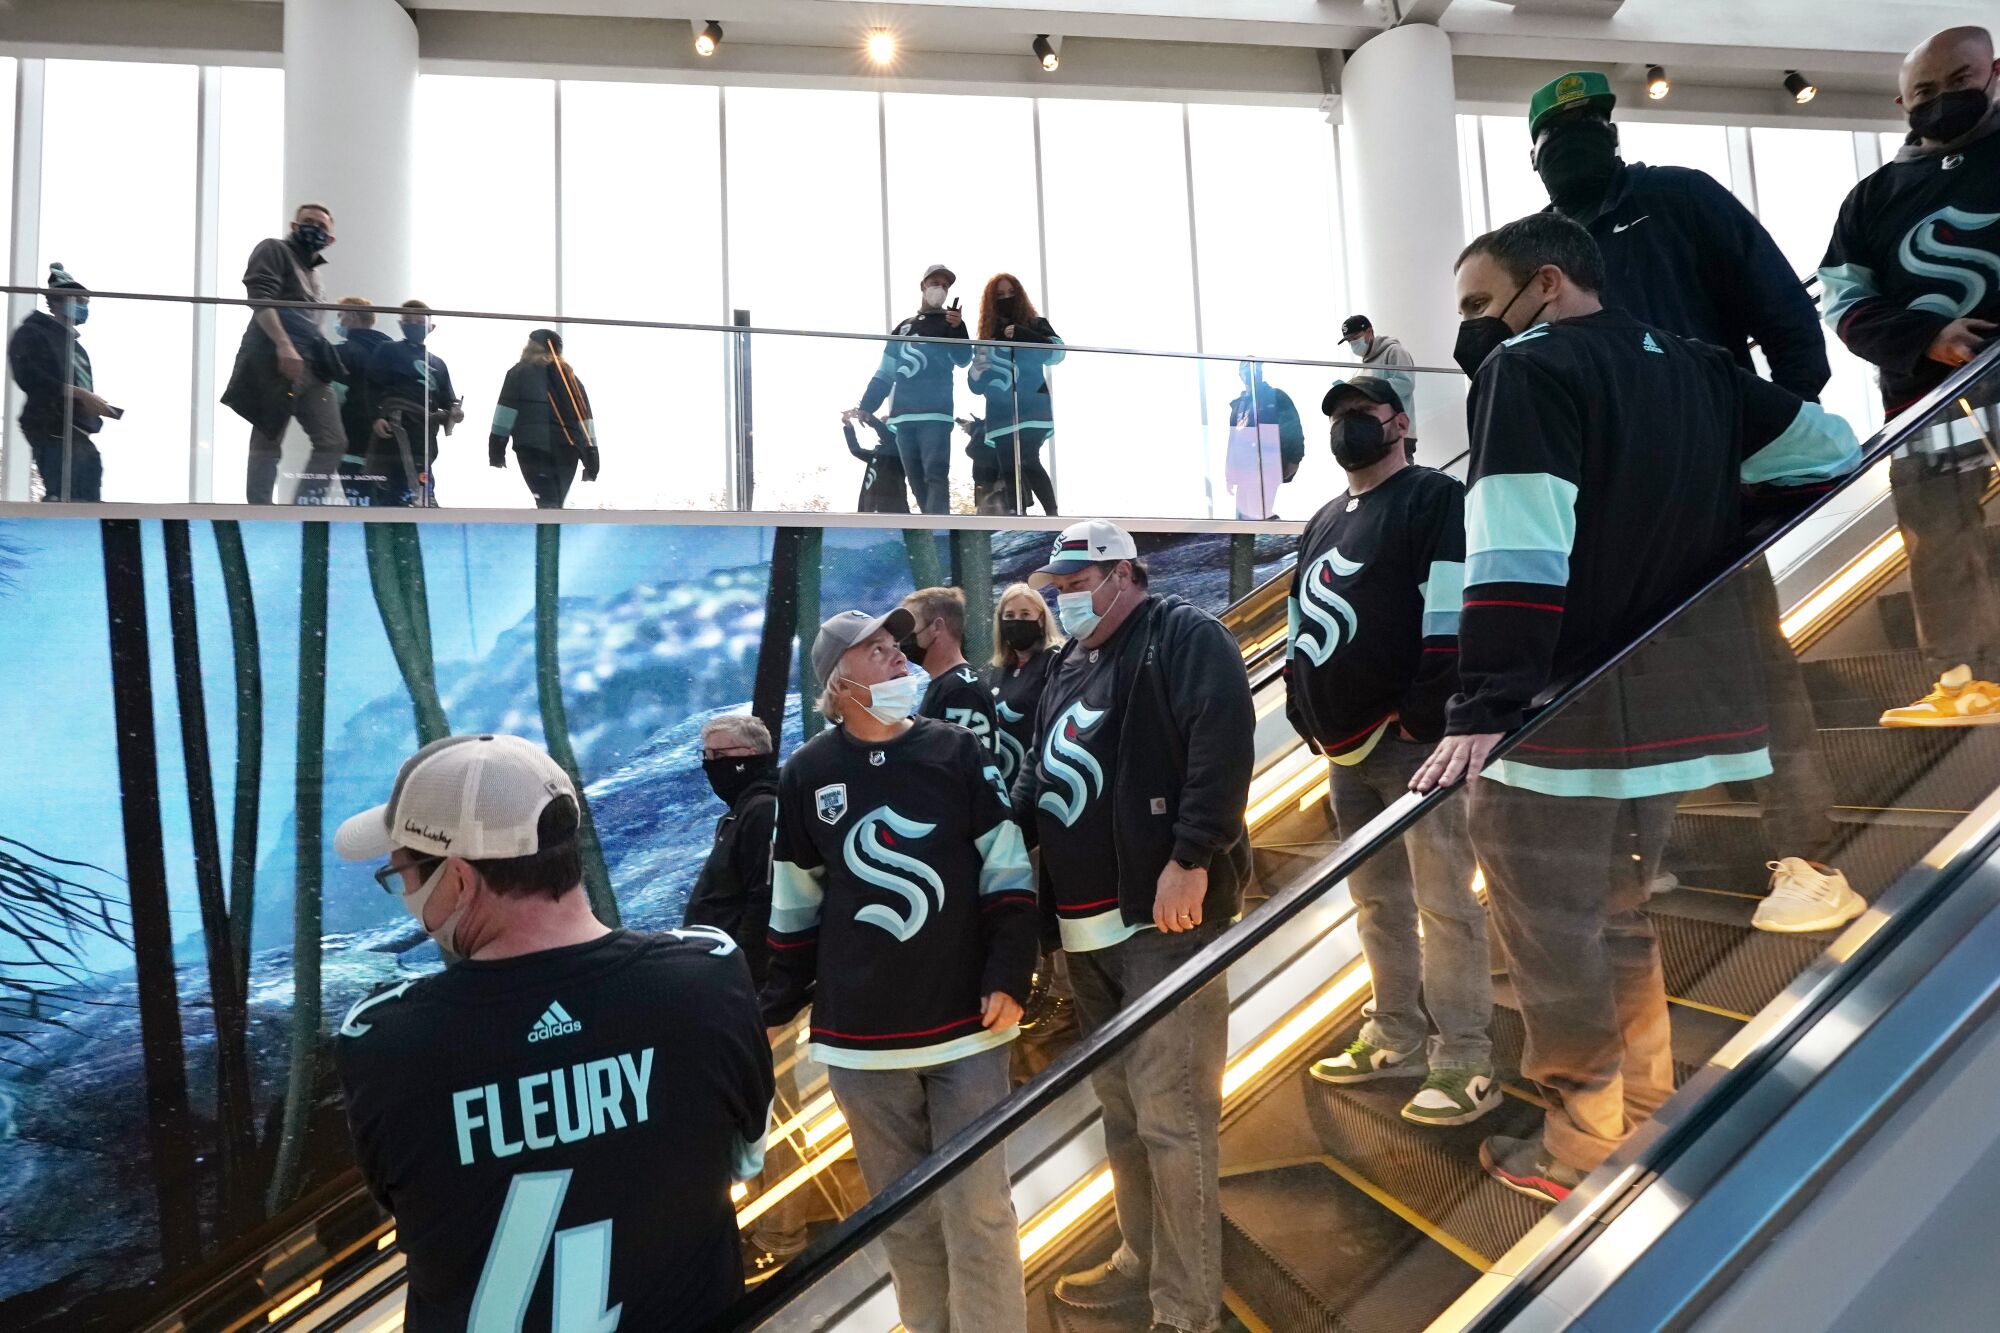 Fans take an escalator into the arena after entering Climate Pledge Arena for a hockey game.